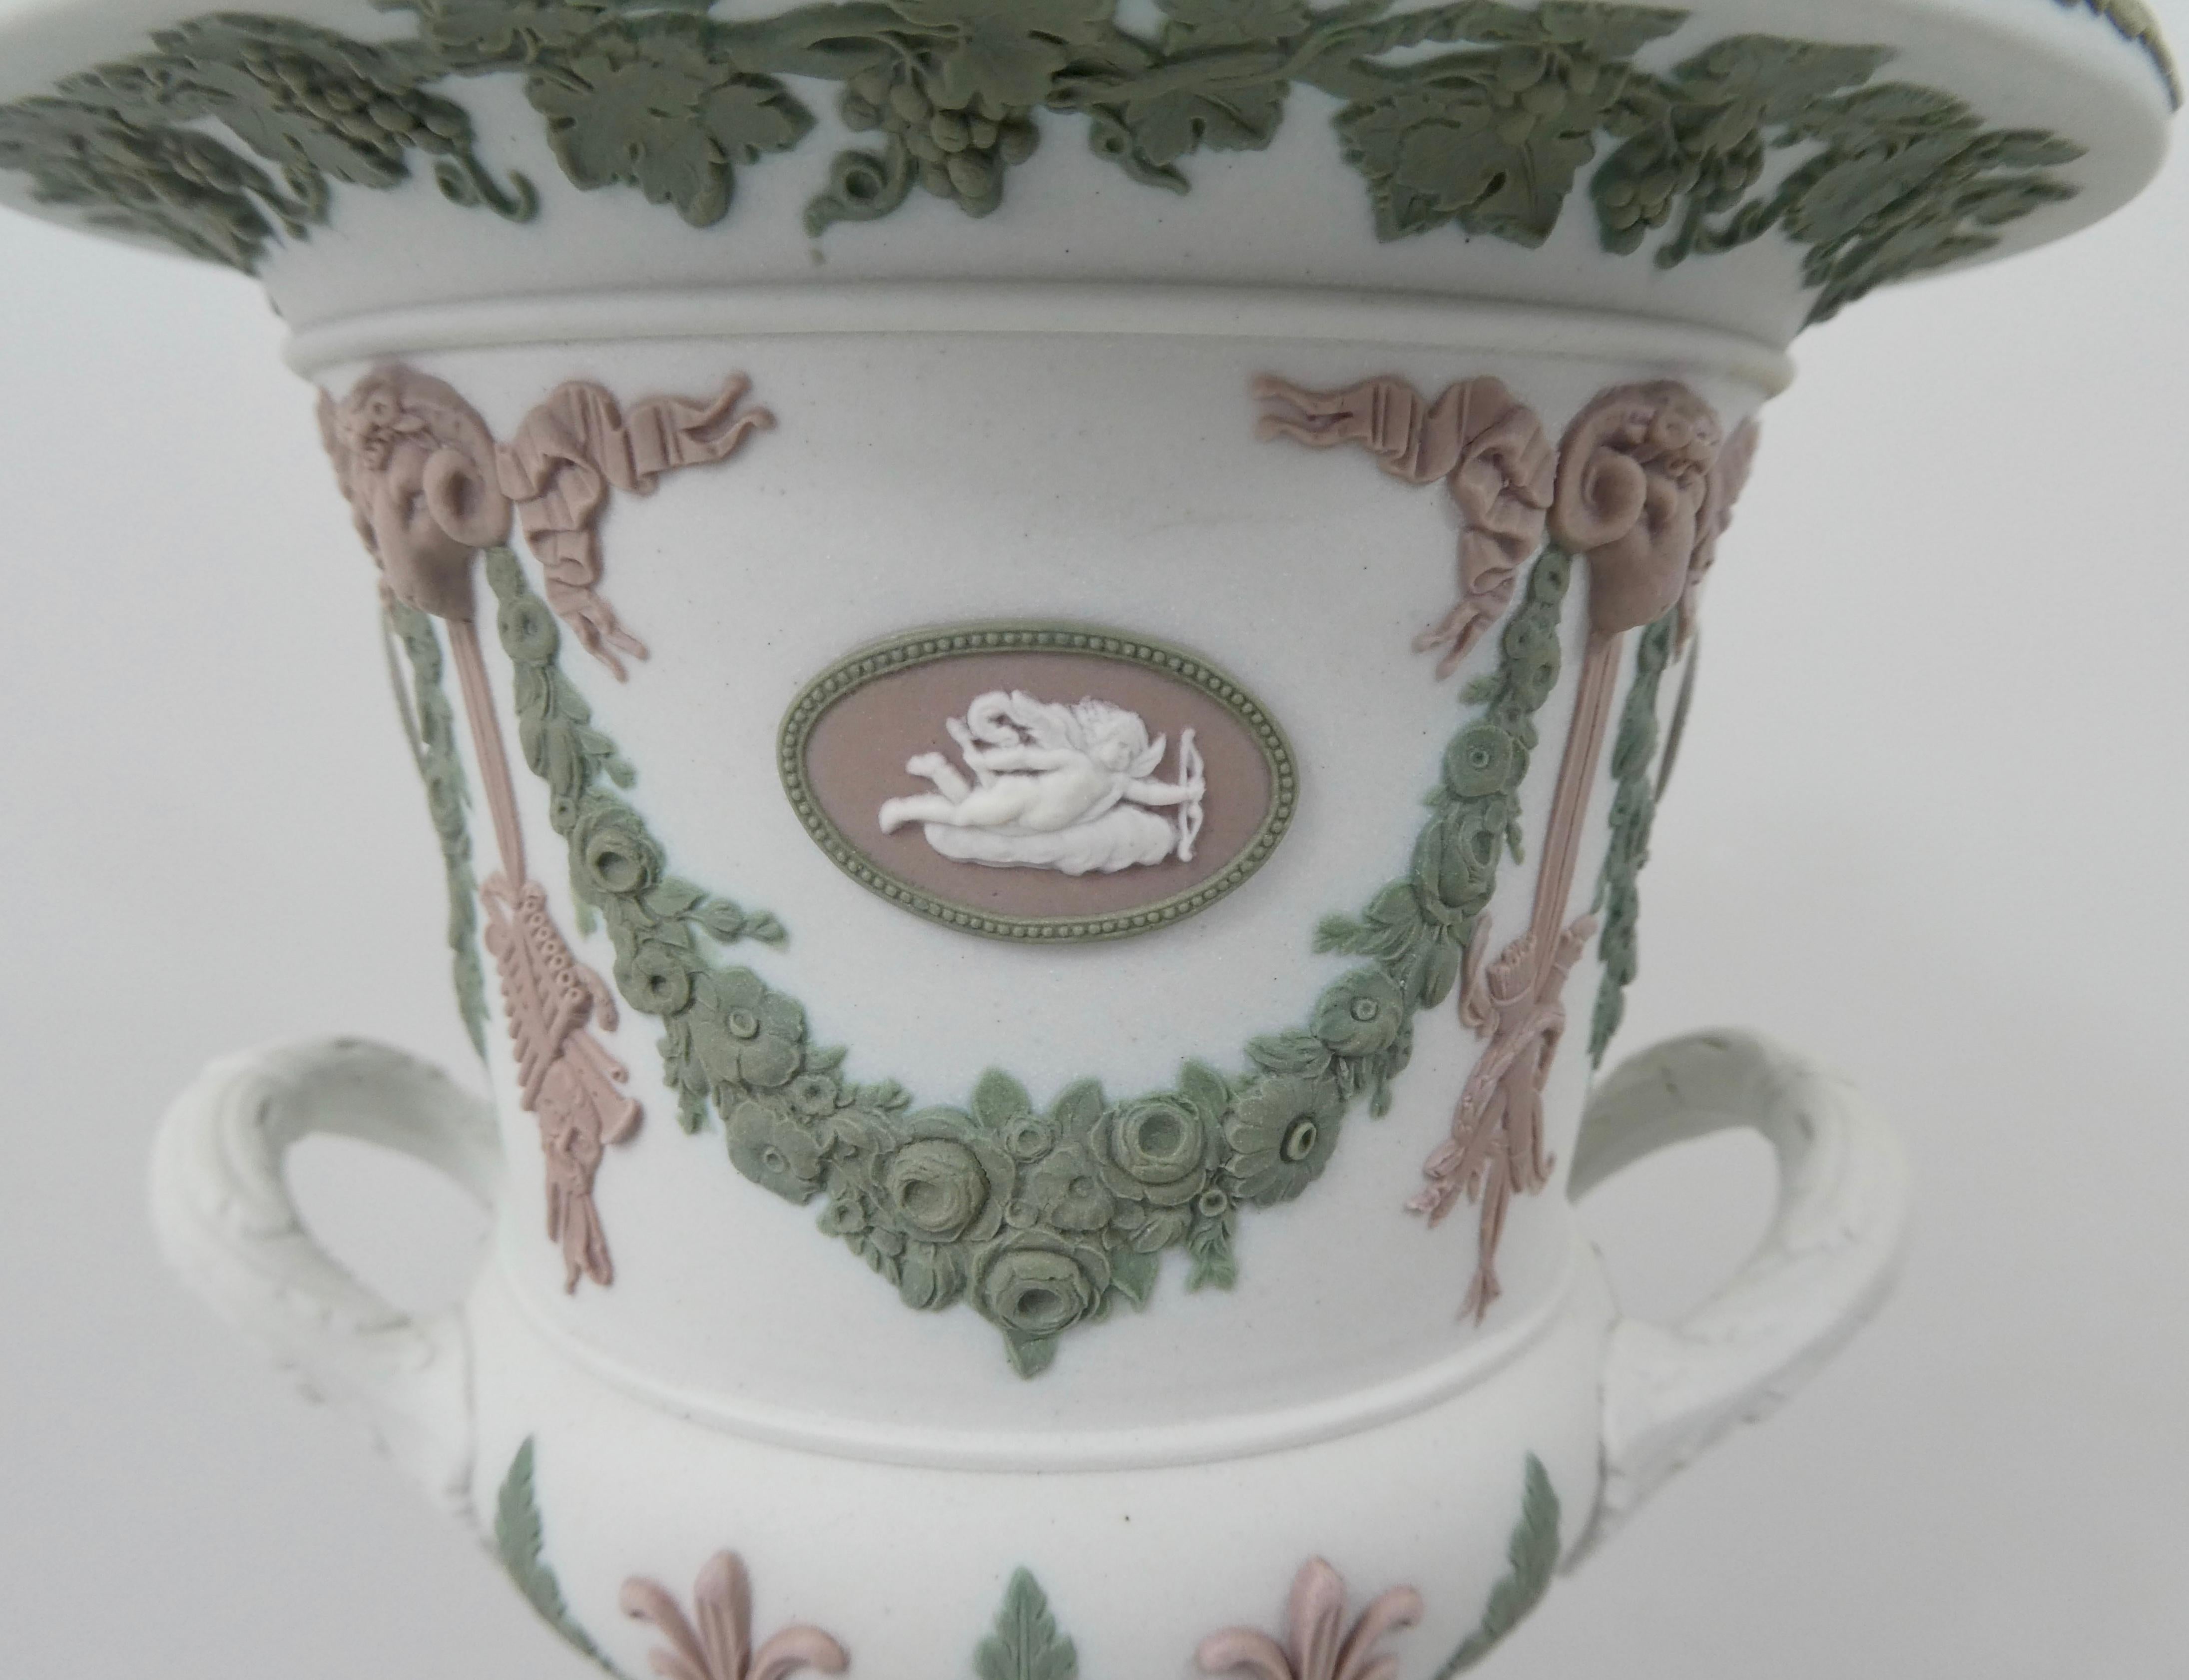 Fired Wedgwood ‘Three colour’ Vase and Cover, circa 1900